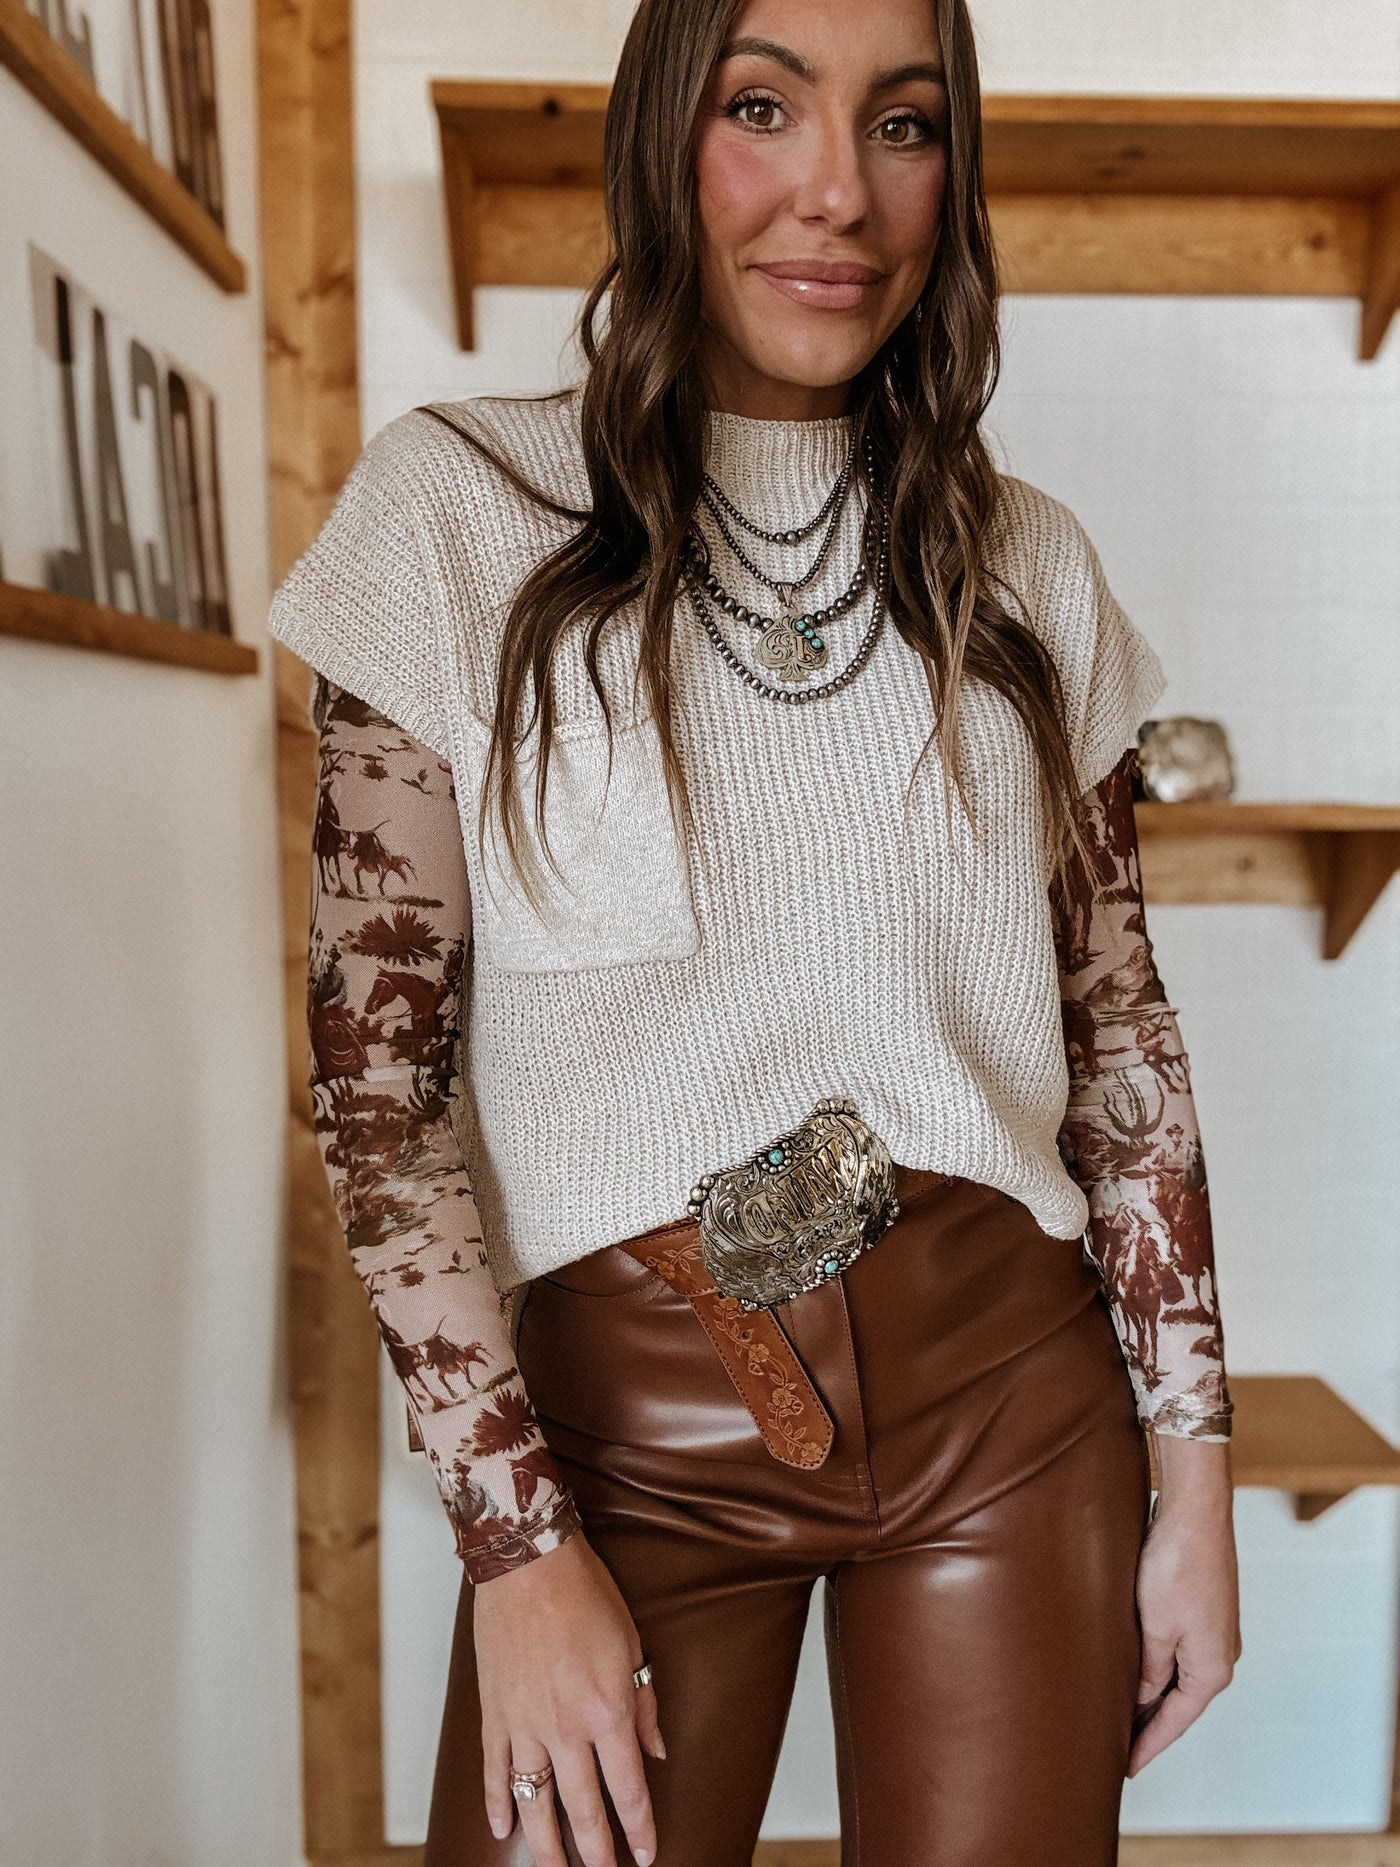 The Beige Knit Sweater Top